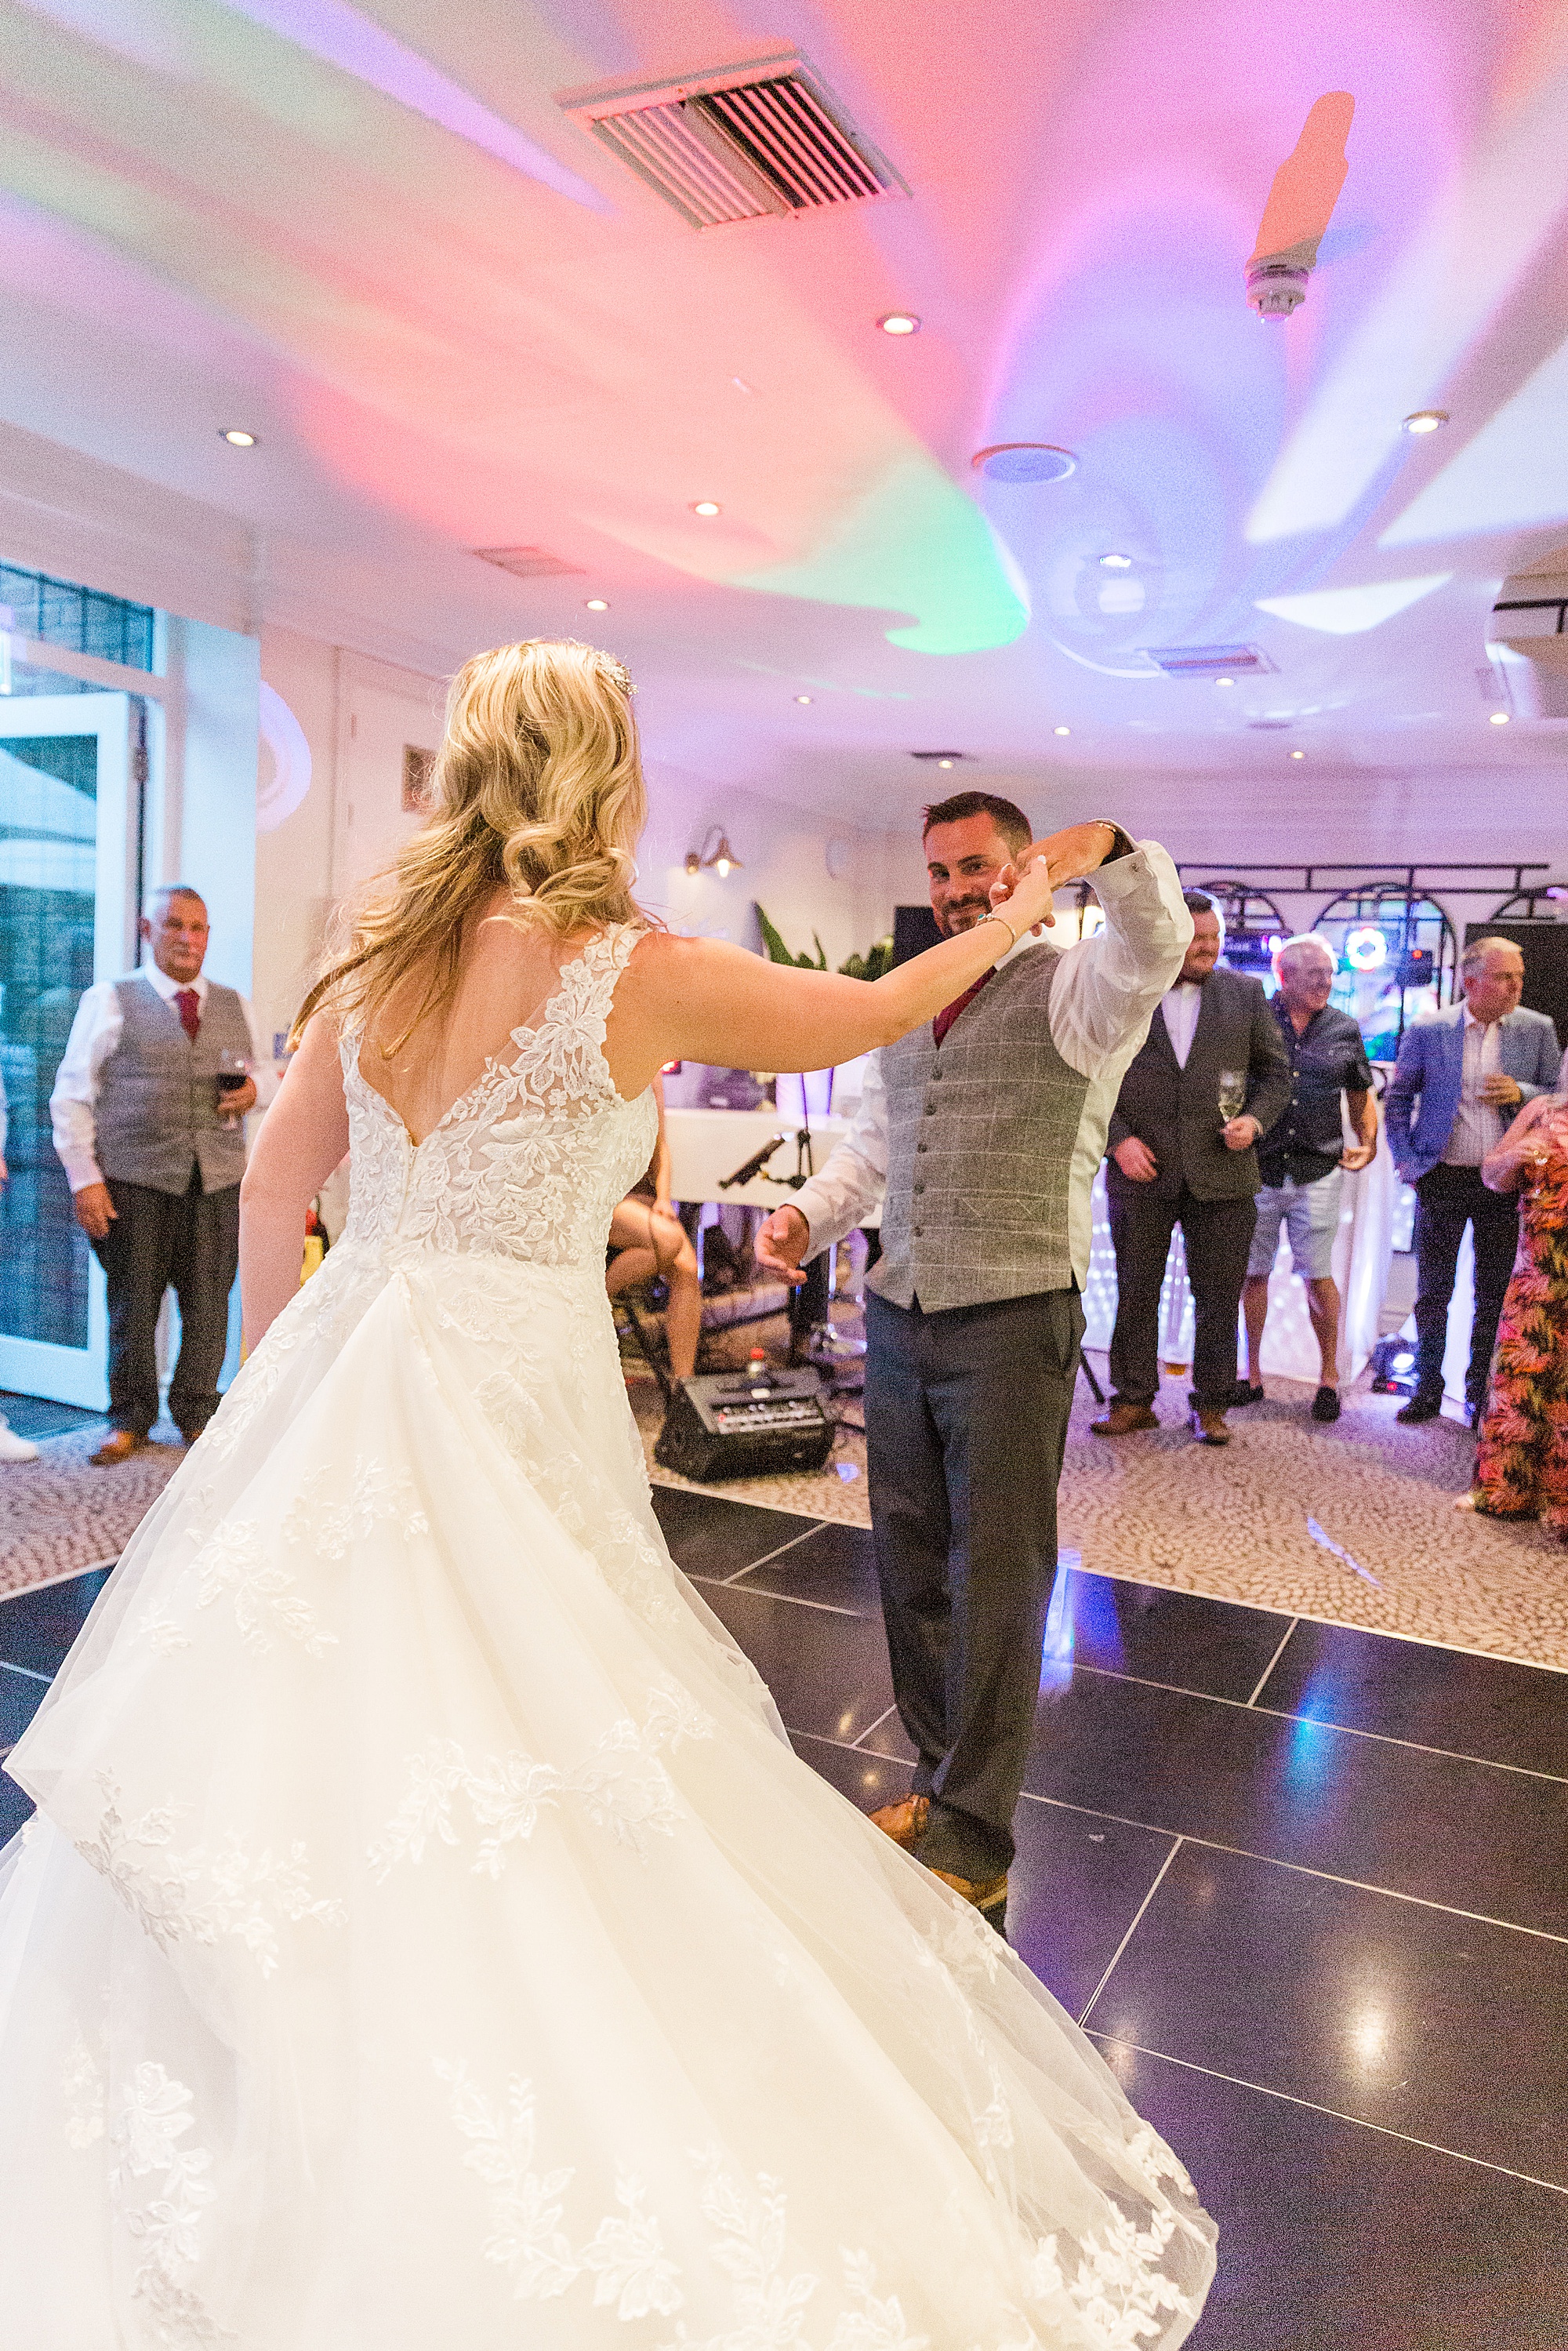 Photo of a bride and groom dancing their first dance together at their wedding at hograths stone manor